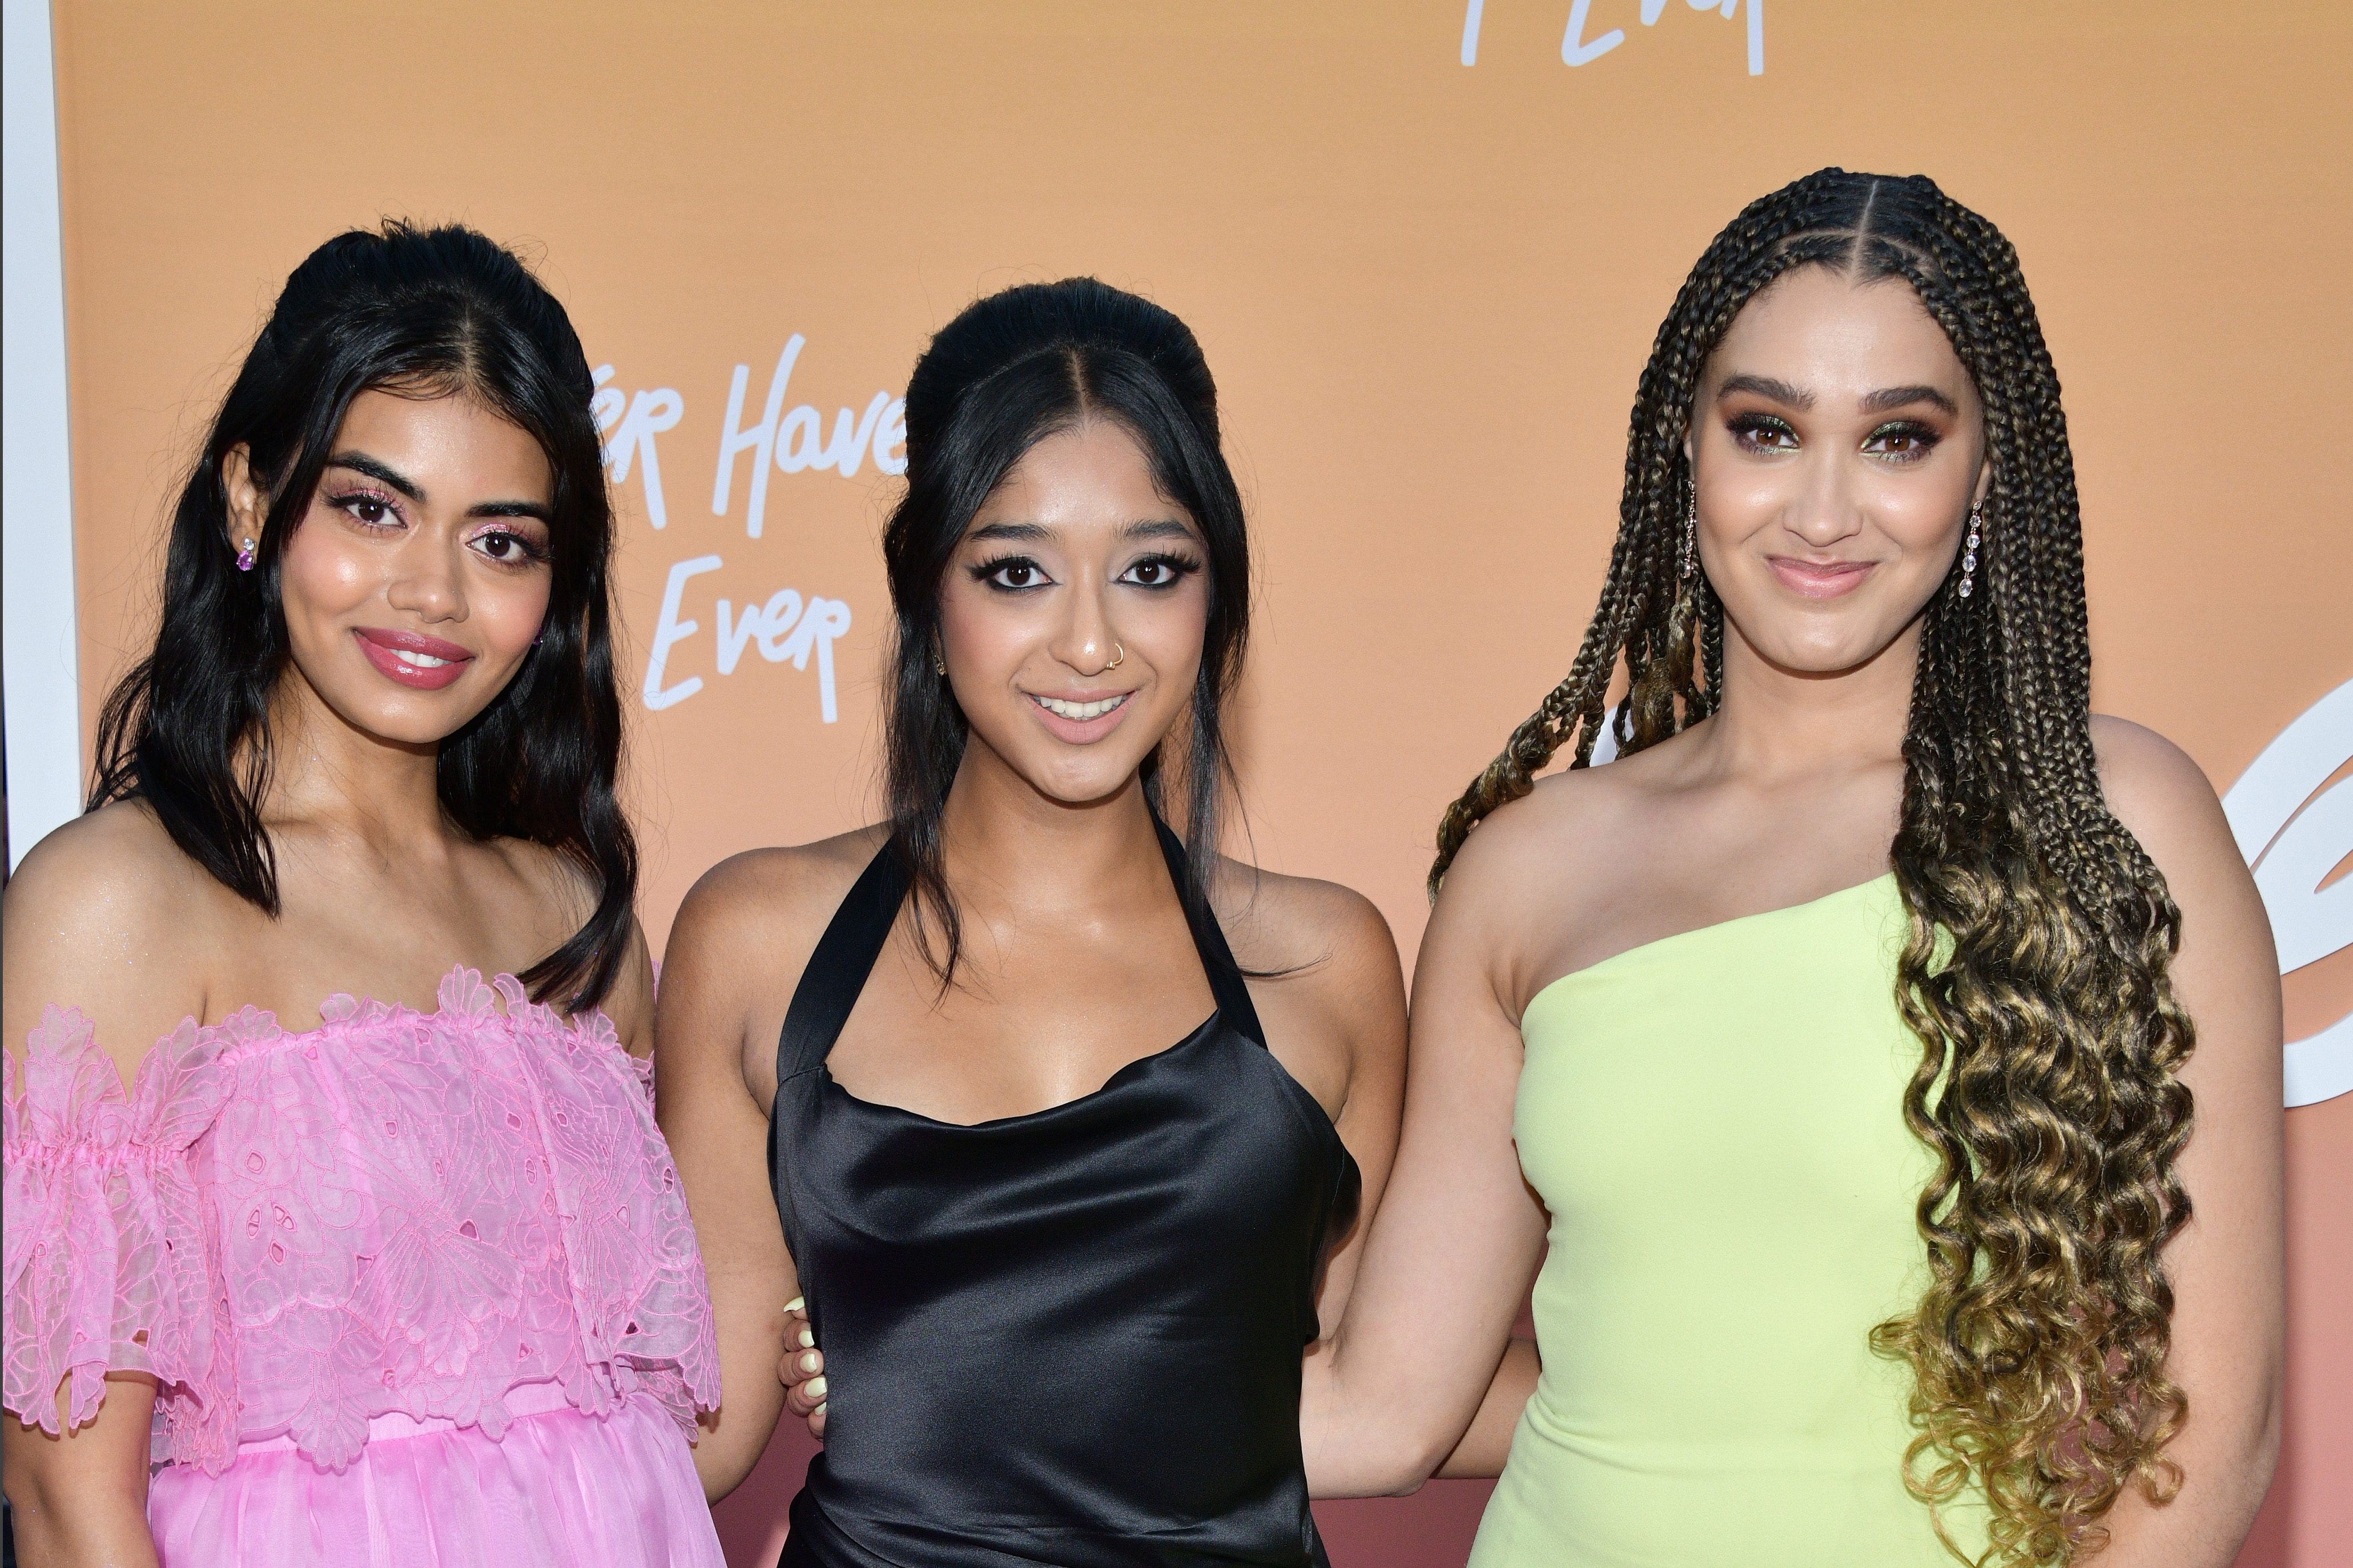 Megan Suri, Maitreyi Ramakrishnan, and Lee Rodriguez attend the Los Angeles premiere of Netflix's "Never Have I Ever" Season 3 at Westwood Village Theater on August 11, 2022, in Los Angeles, California. | Source: Getty Images